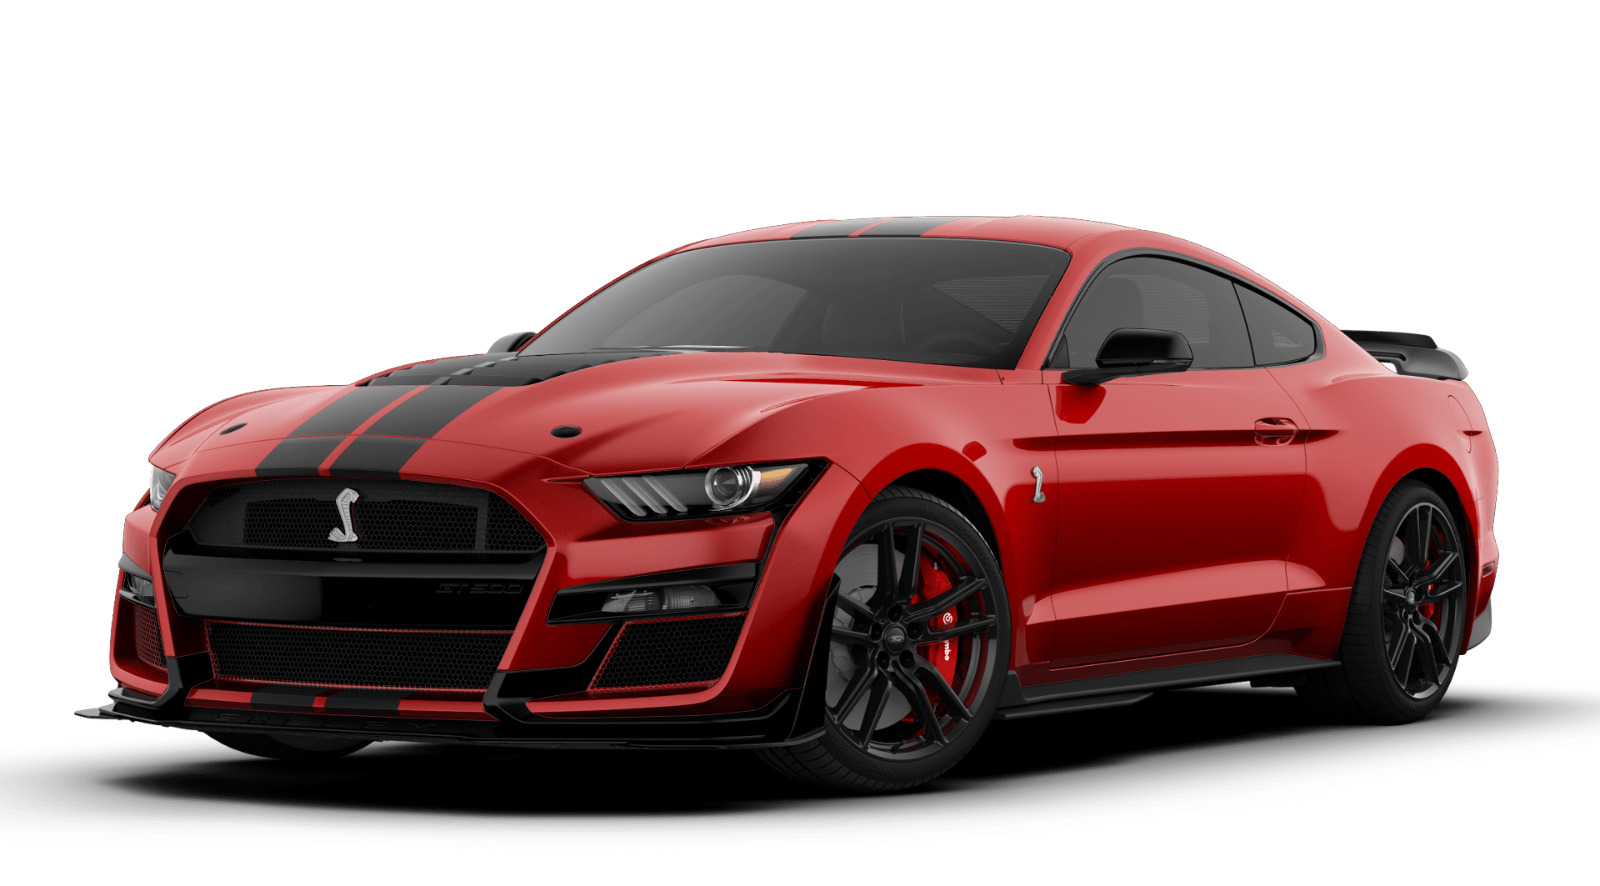 2020 Mustang Shelby GT500 Car Cutout GARAGE STEEL SIGN Rapid Red Black  Stripes